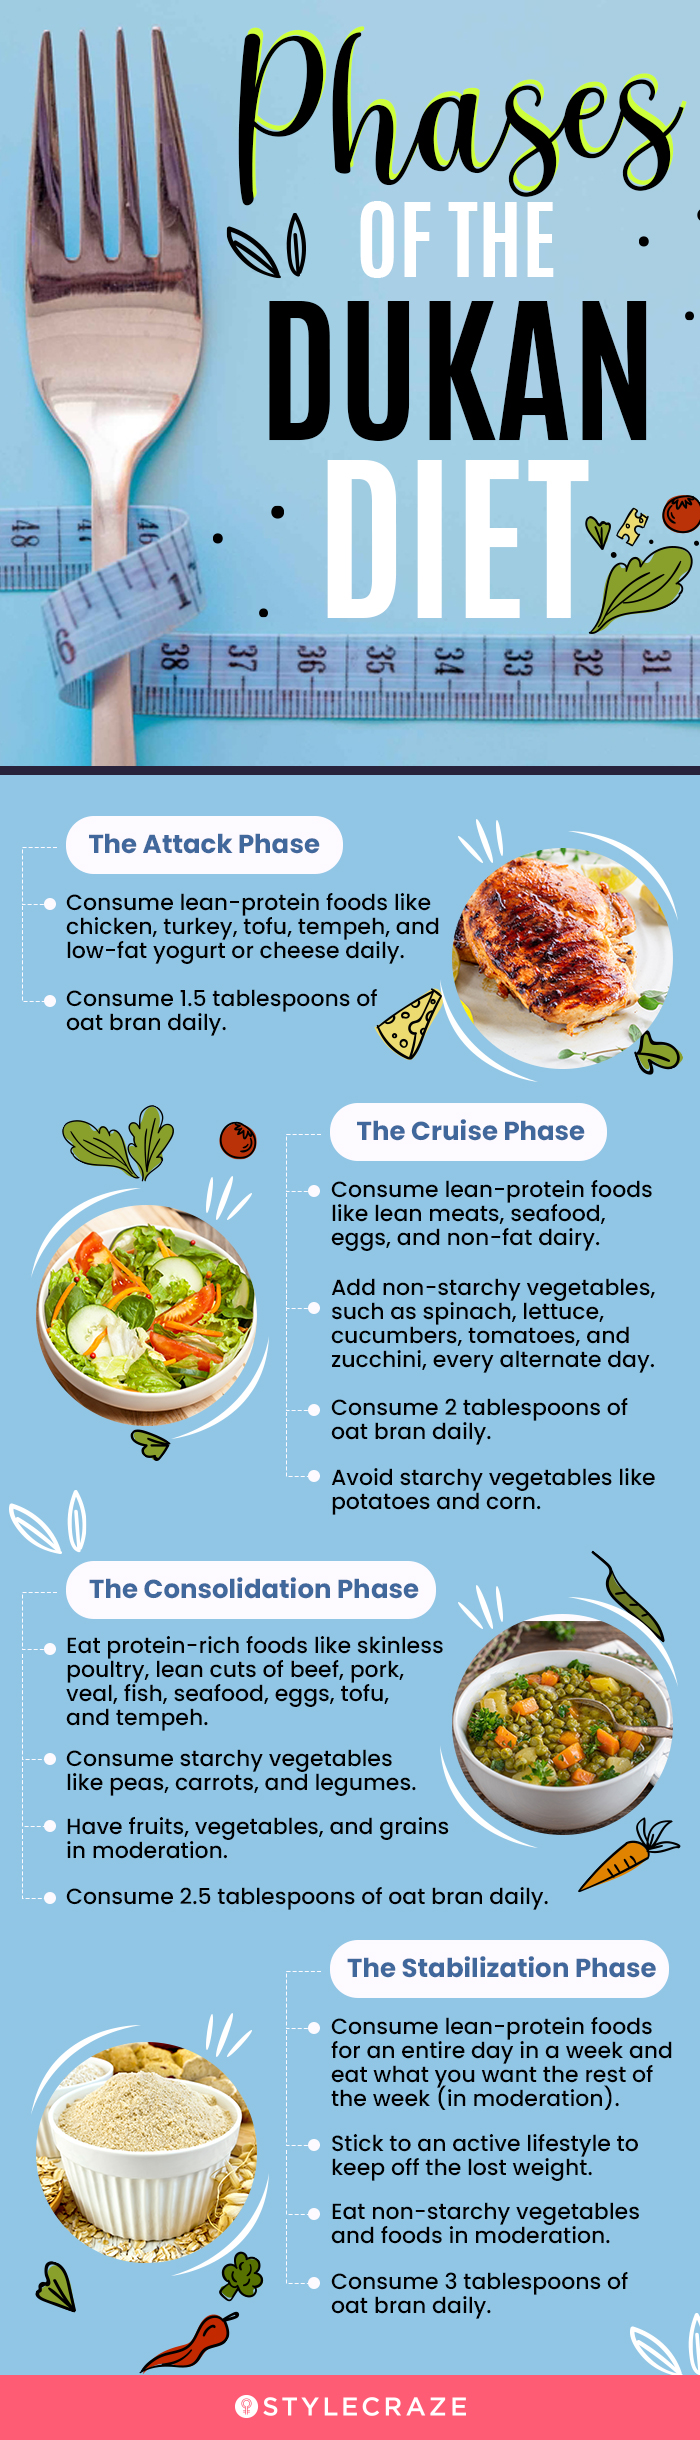 phases of the dukan diet (infographic)